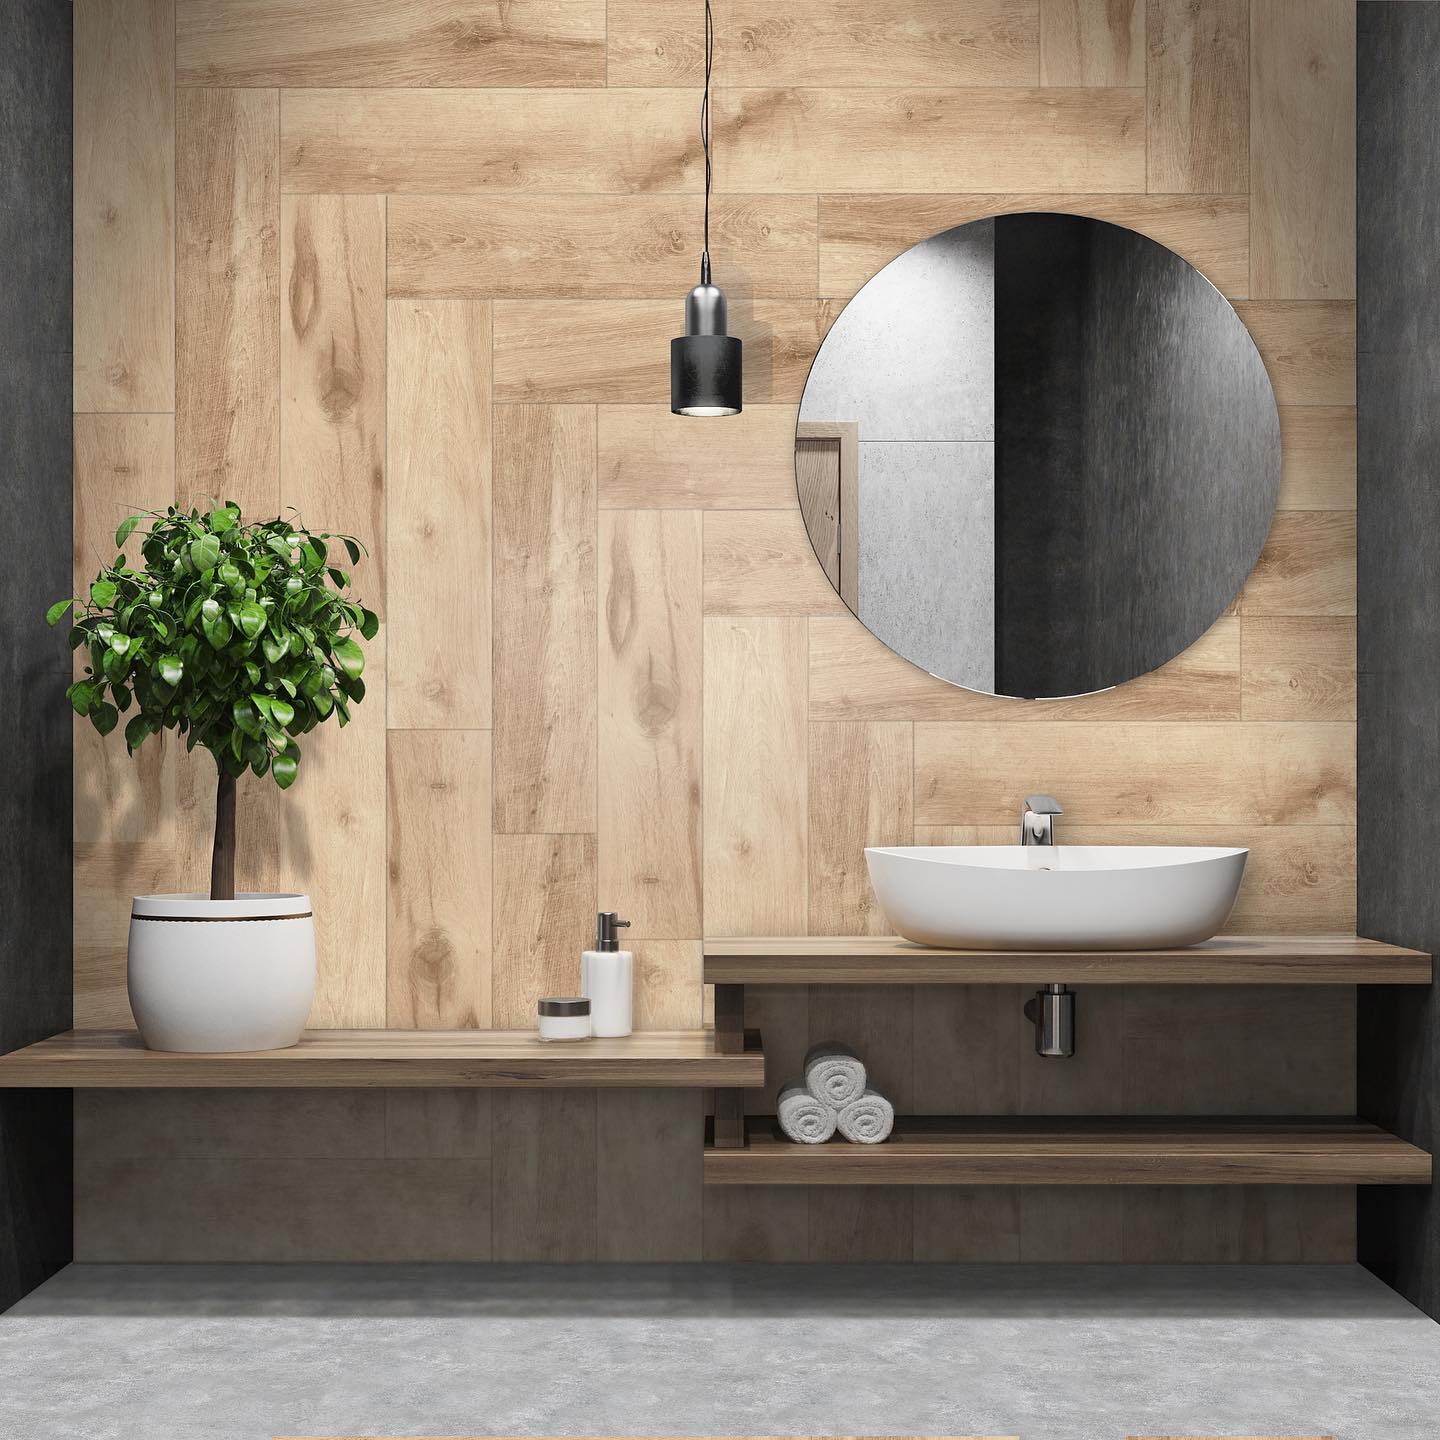 New Year New Tile. Meet our Heirloom collection. One of our many new series, Heirloom™ offers a naturally elegant wood look, designed for both floors & walls. This pretty porcelain tile is available in 3 warm and cool on trend colors! Wood-look tile provides a both beautiful and practical application, as it lasts in environments exposed to moisture such as kitchens and baths. #emsertile #woodlooktile